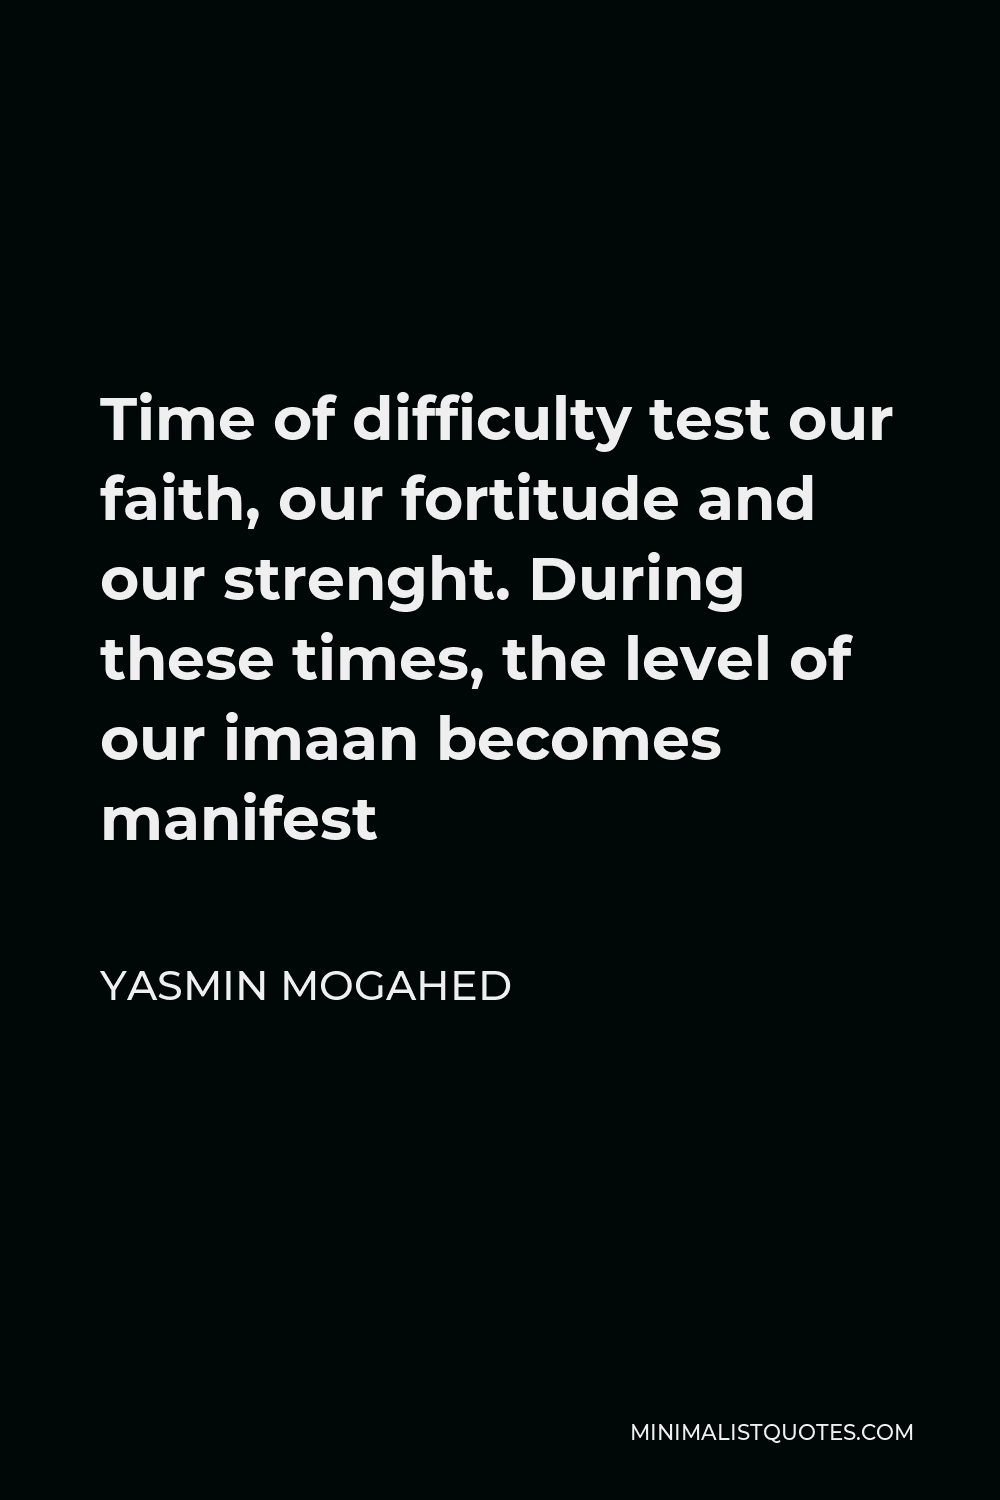 Yasmin Mogahed Quote - Time of difficulty test our faith, our fortitude and our strenght. During these times, the level of our imaan becomes manifest